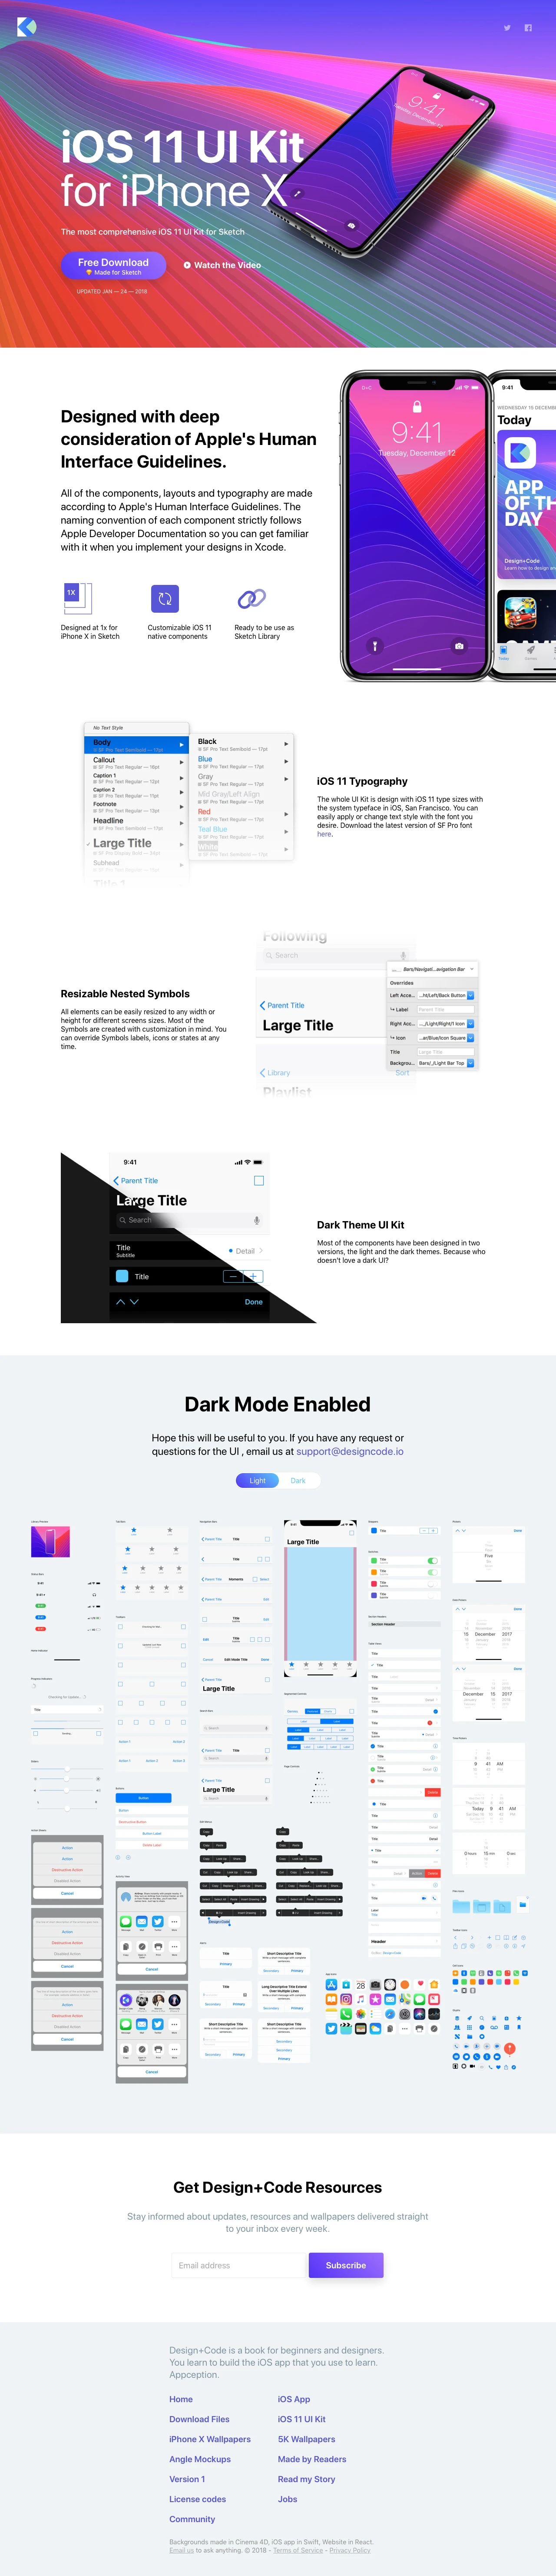 iOS 11 UI Kit for Sketch Landing Page Example: The most comprehensive iOS 11 UI Kit for Sketch